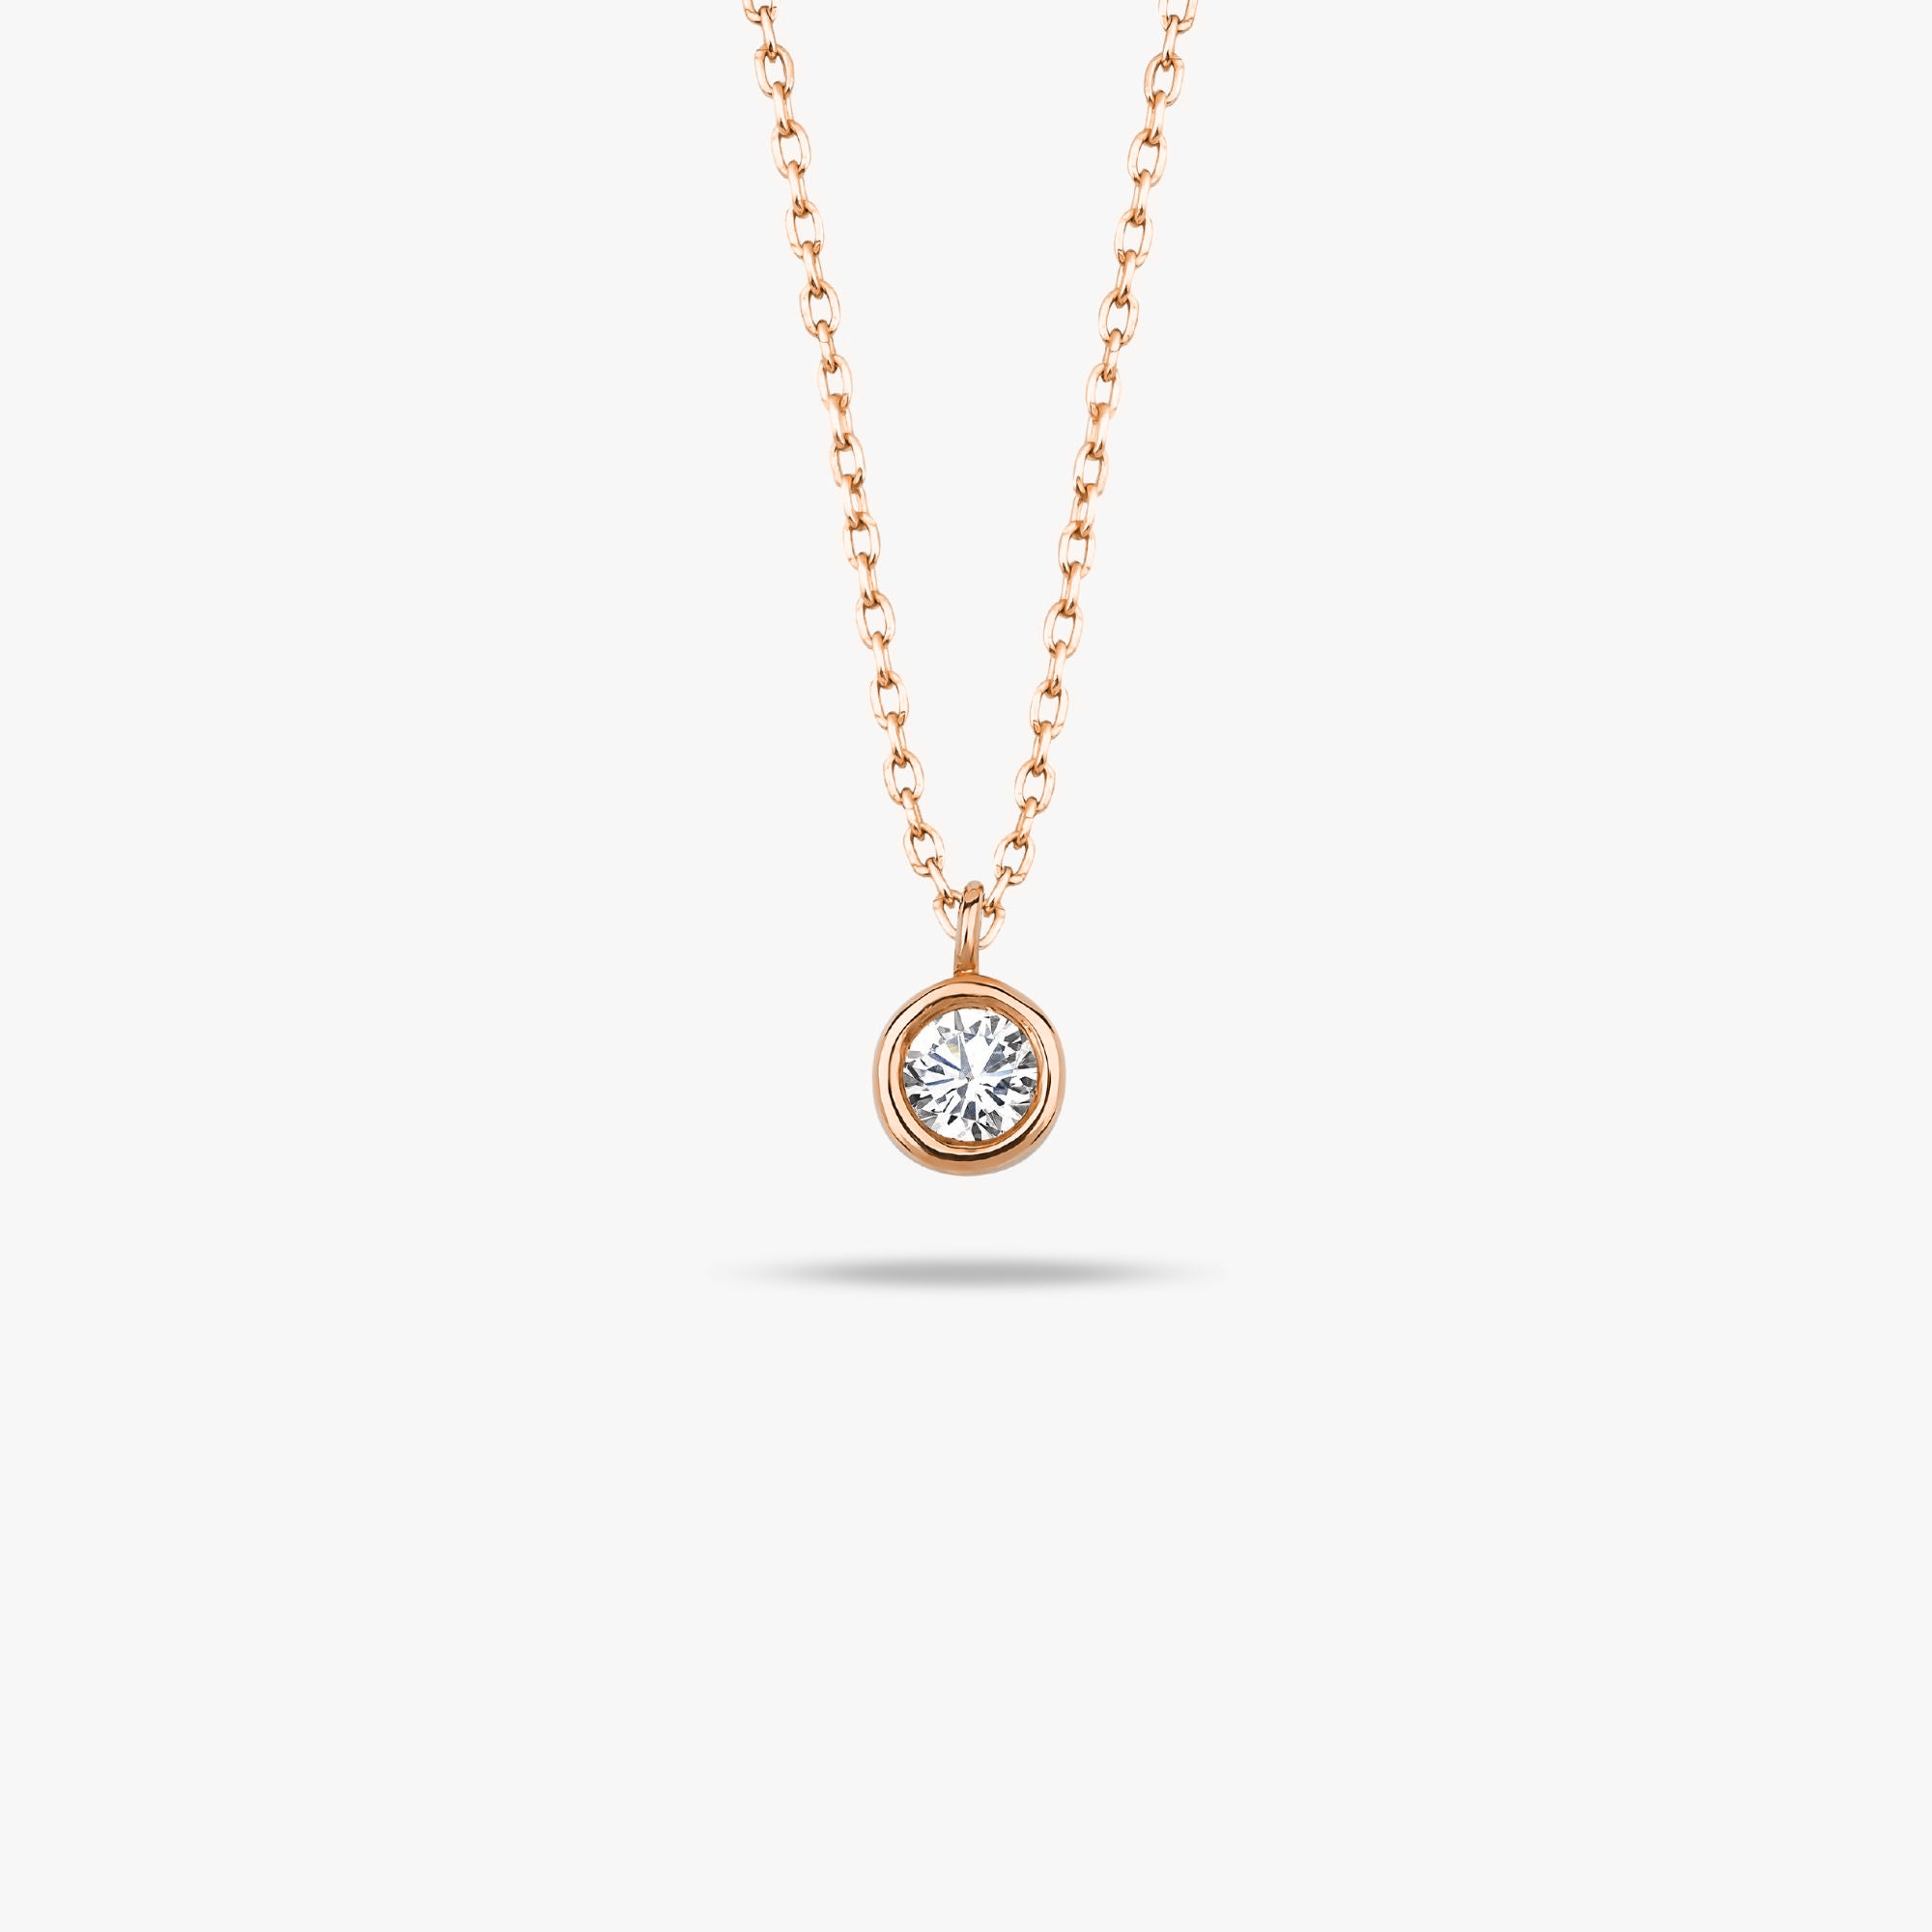 Bezel Set Solitaire Necklace Available in 14K and 18K Gold